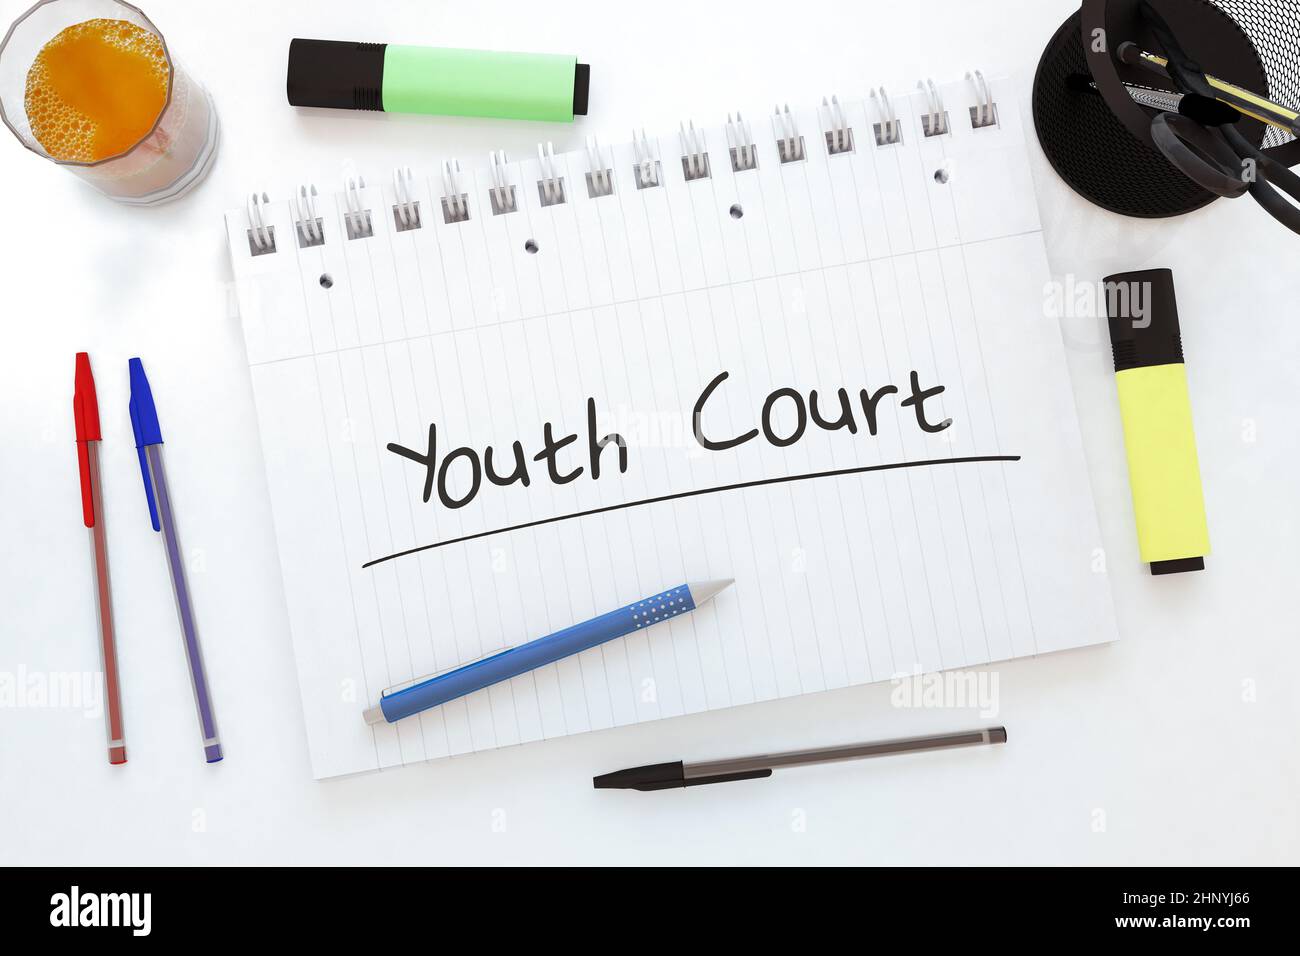 Youth Court - handwritten text in a notebook on a desk - 3d render illustration. Stock Photo